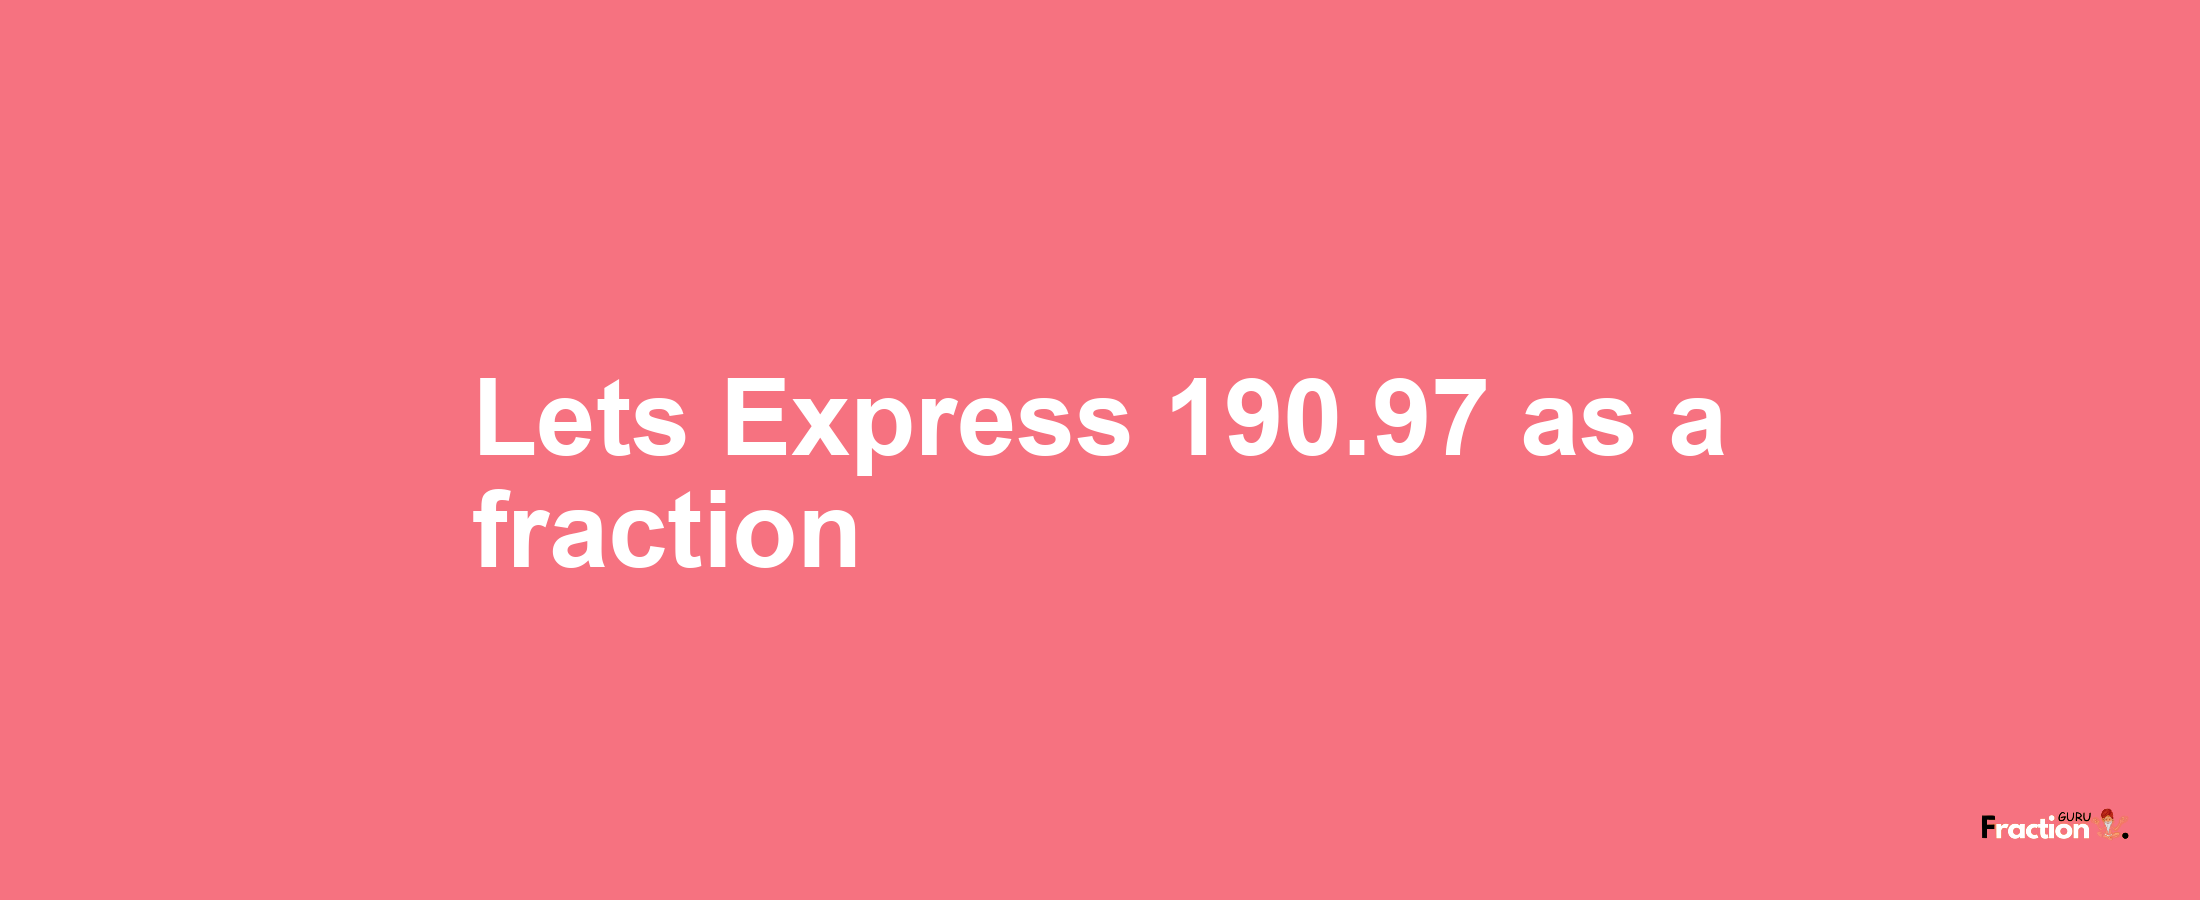 Lets Express 190.97 as afraction